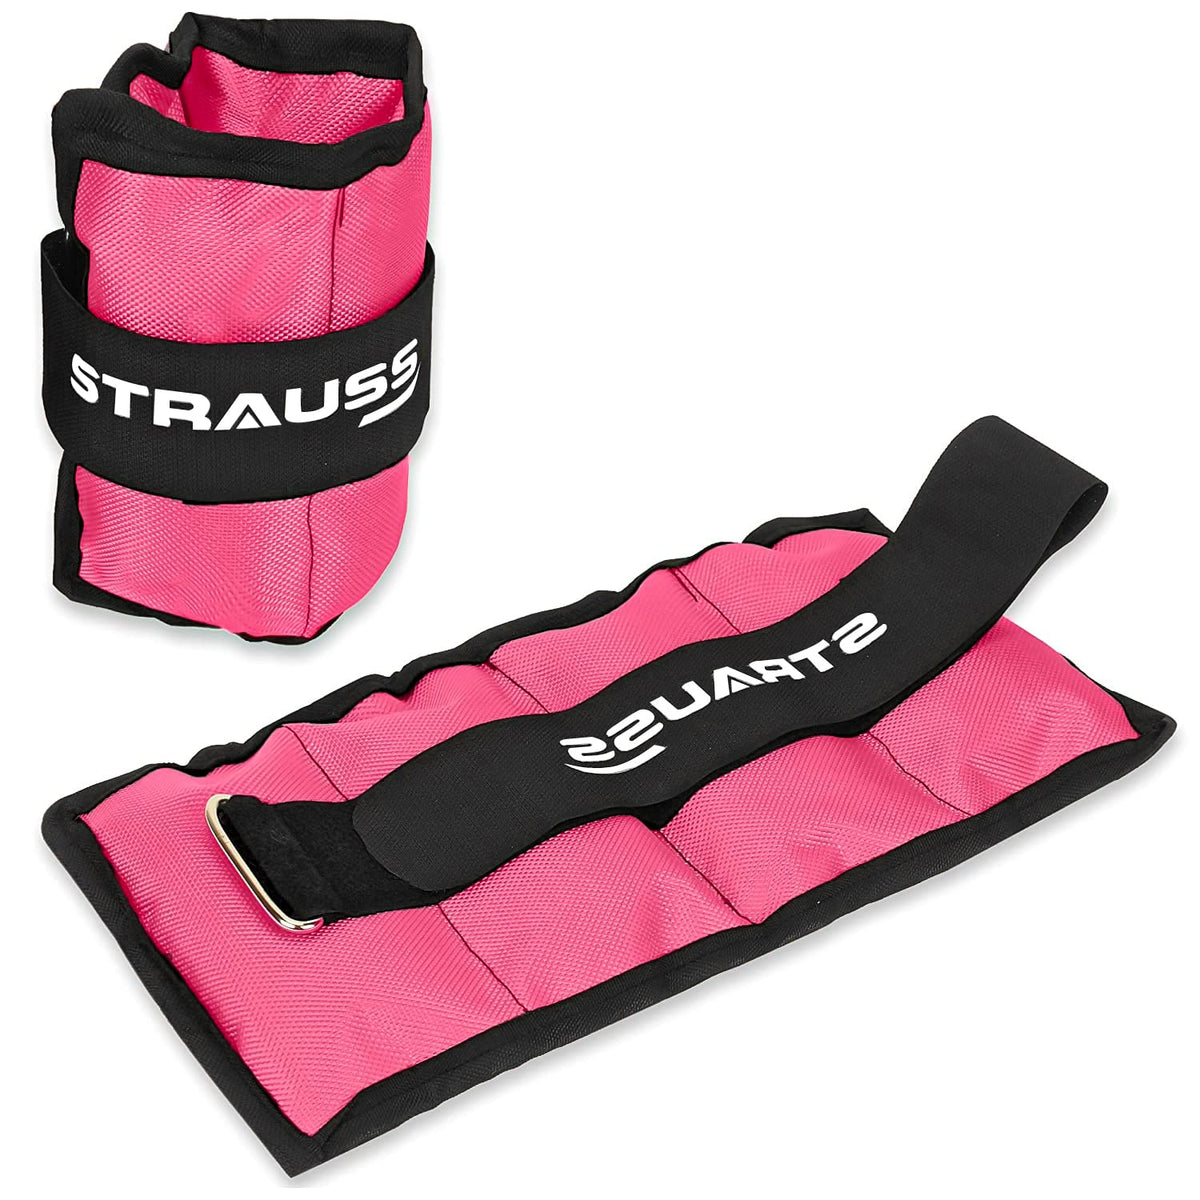 Strauss Adjustable Ankle/Wrist Weights 1 KG X 2 | Ideal for Walking, Running, Jogging, Cycling, Gym, Workout & Strength Training | Easy to Use on Ankle, Wrist, Leg, (Pink)